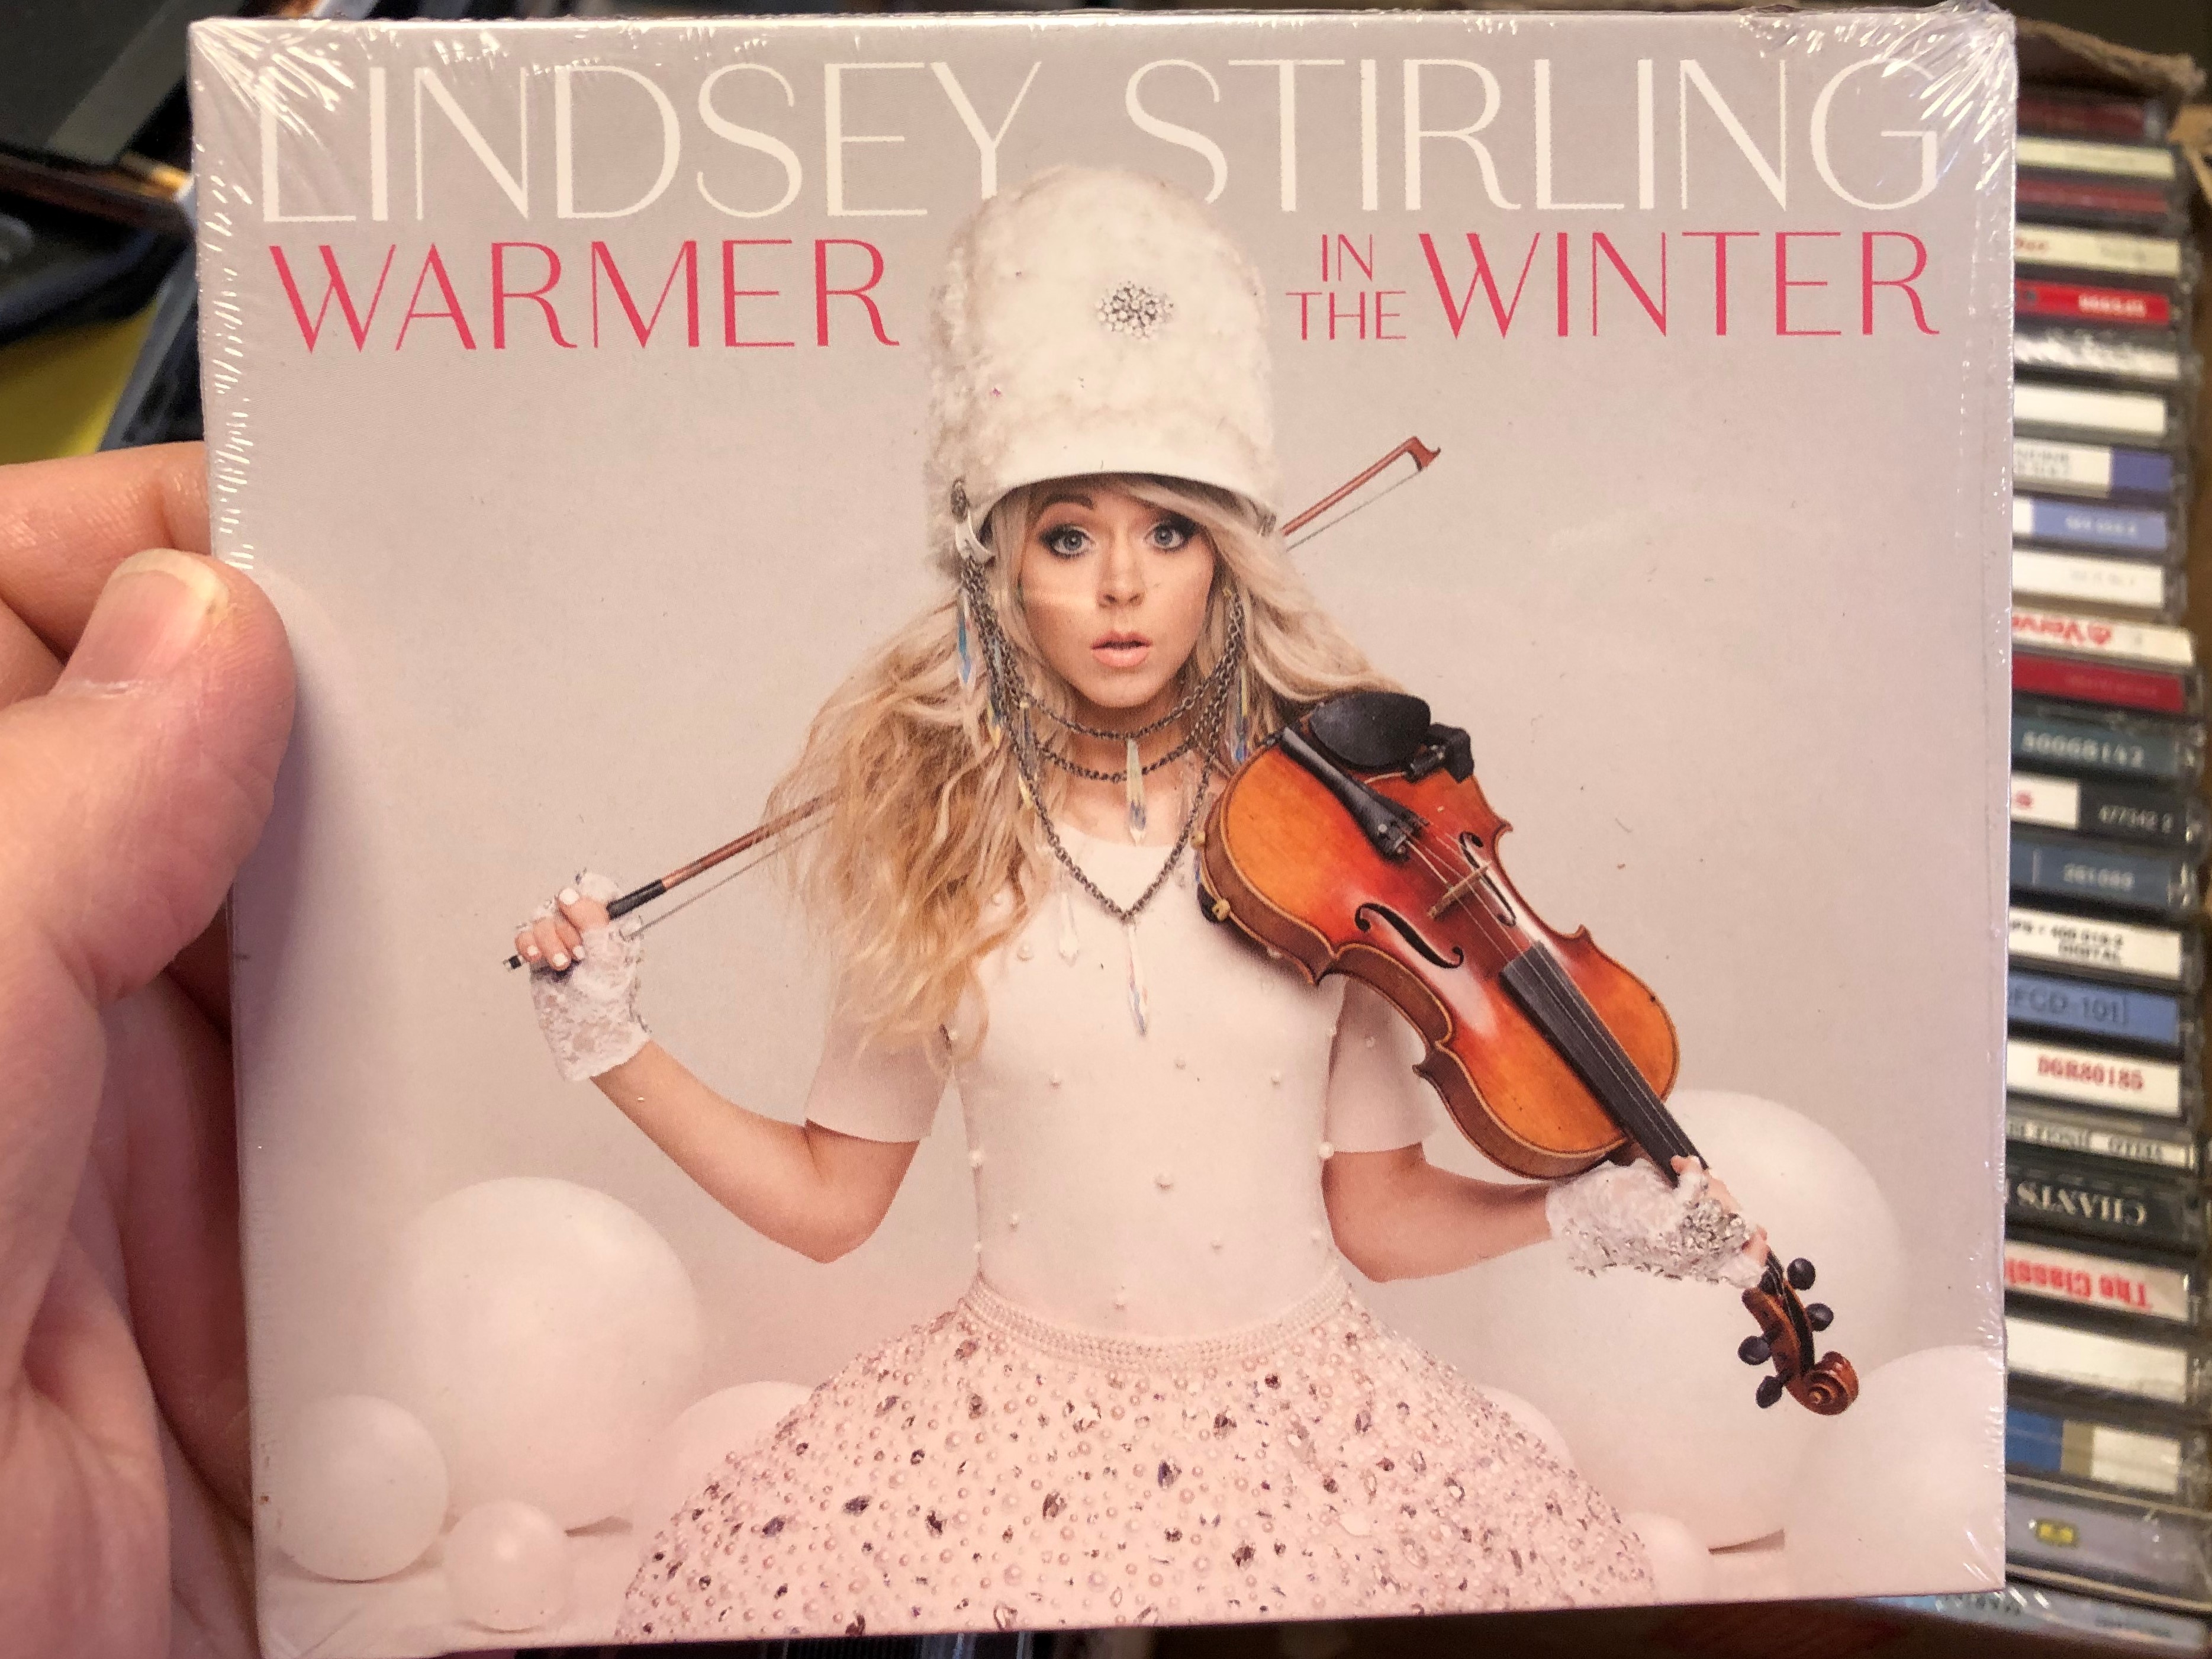 lindsey-stirling-warmer-in-the-winter-concord-records-audio-cd-2017-0888072039520-1-.jpg